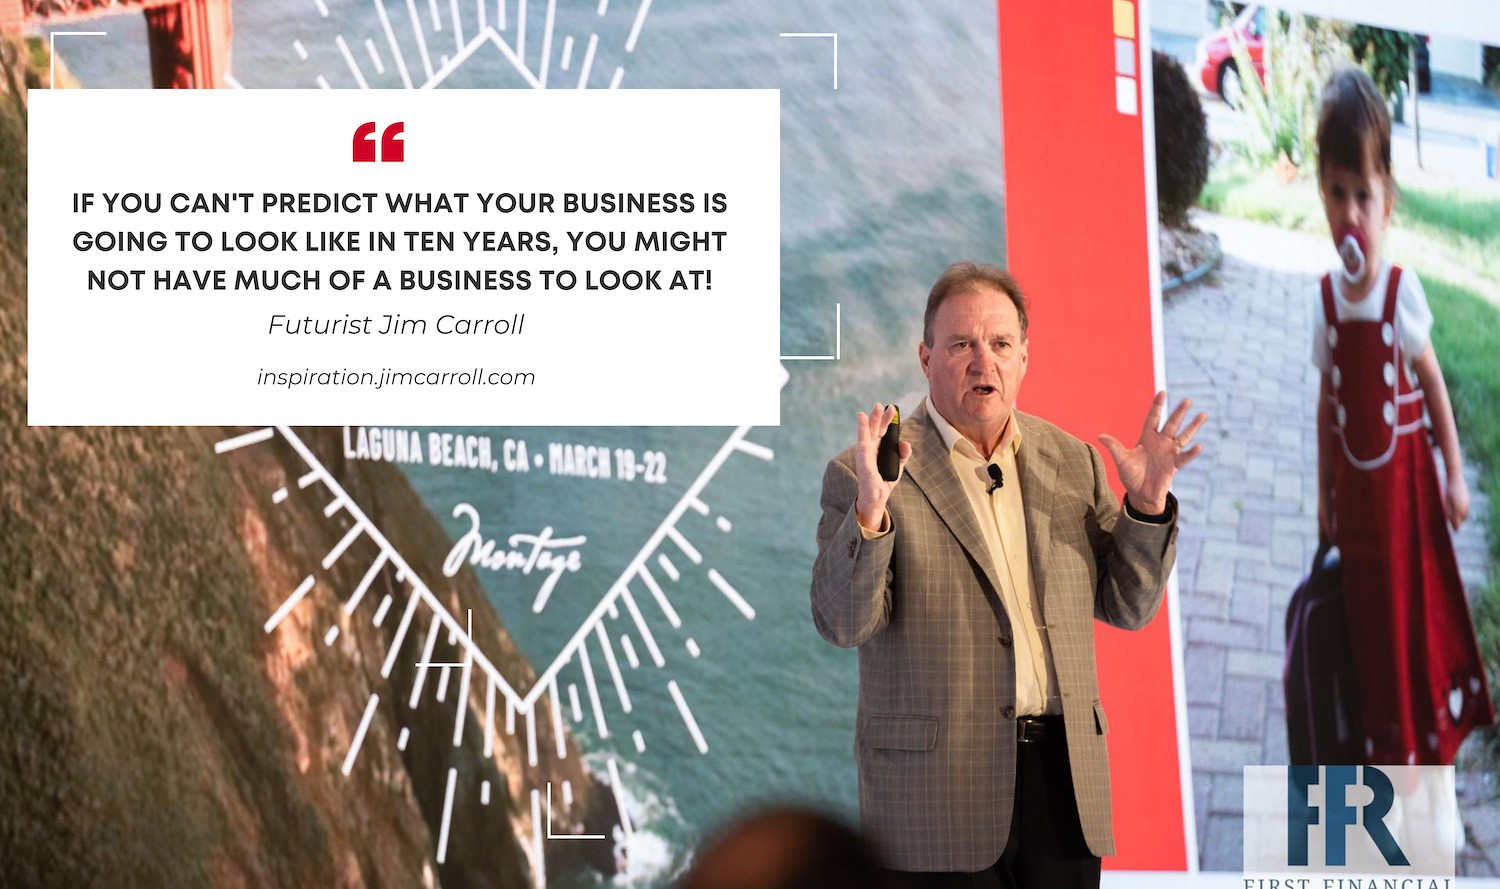 "If you can't predict what your business is going to look like in ten years, you might not have much of a business to look at!" - Futurist Jim Carroll